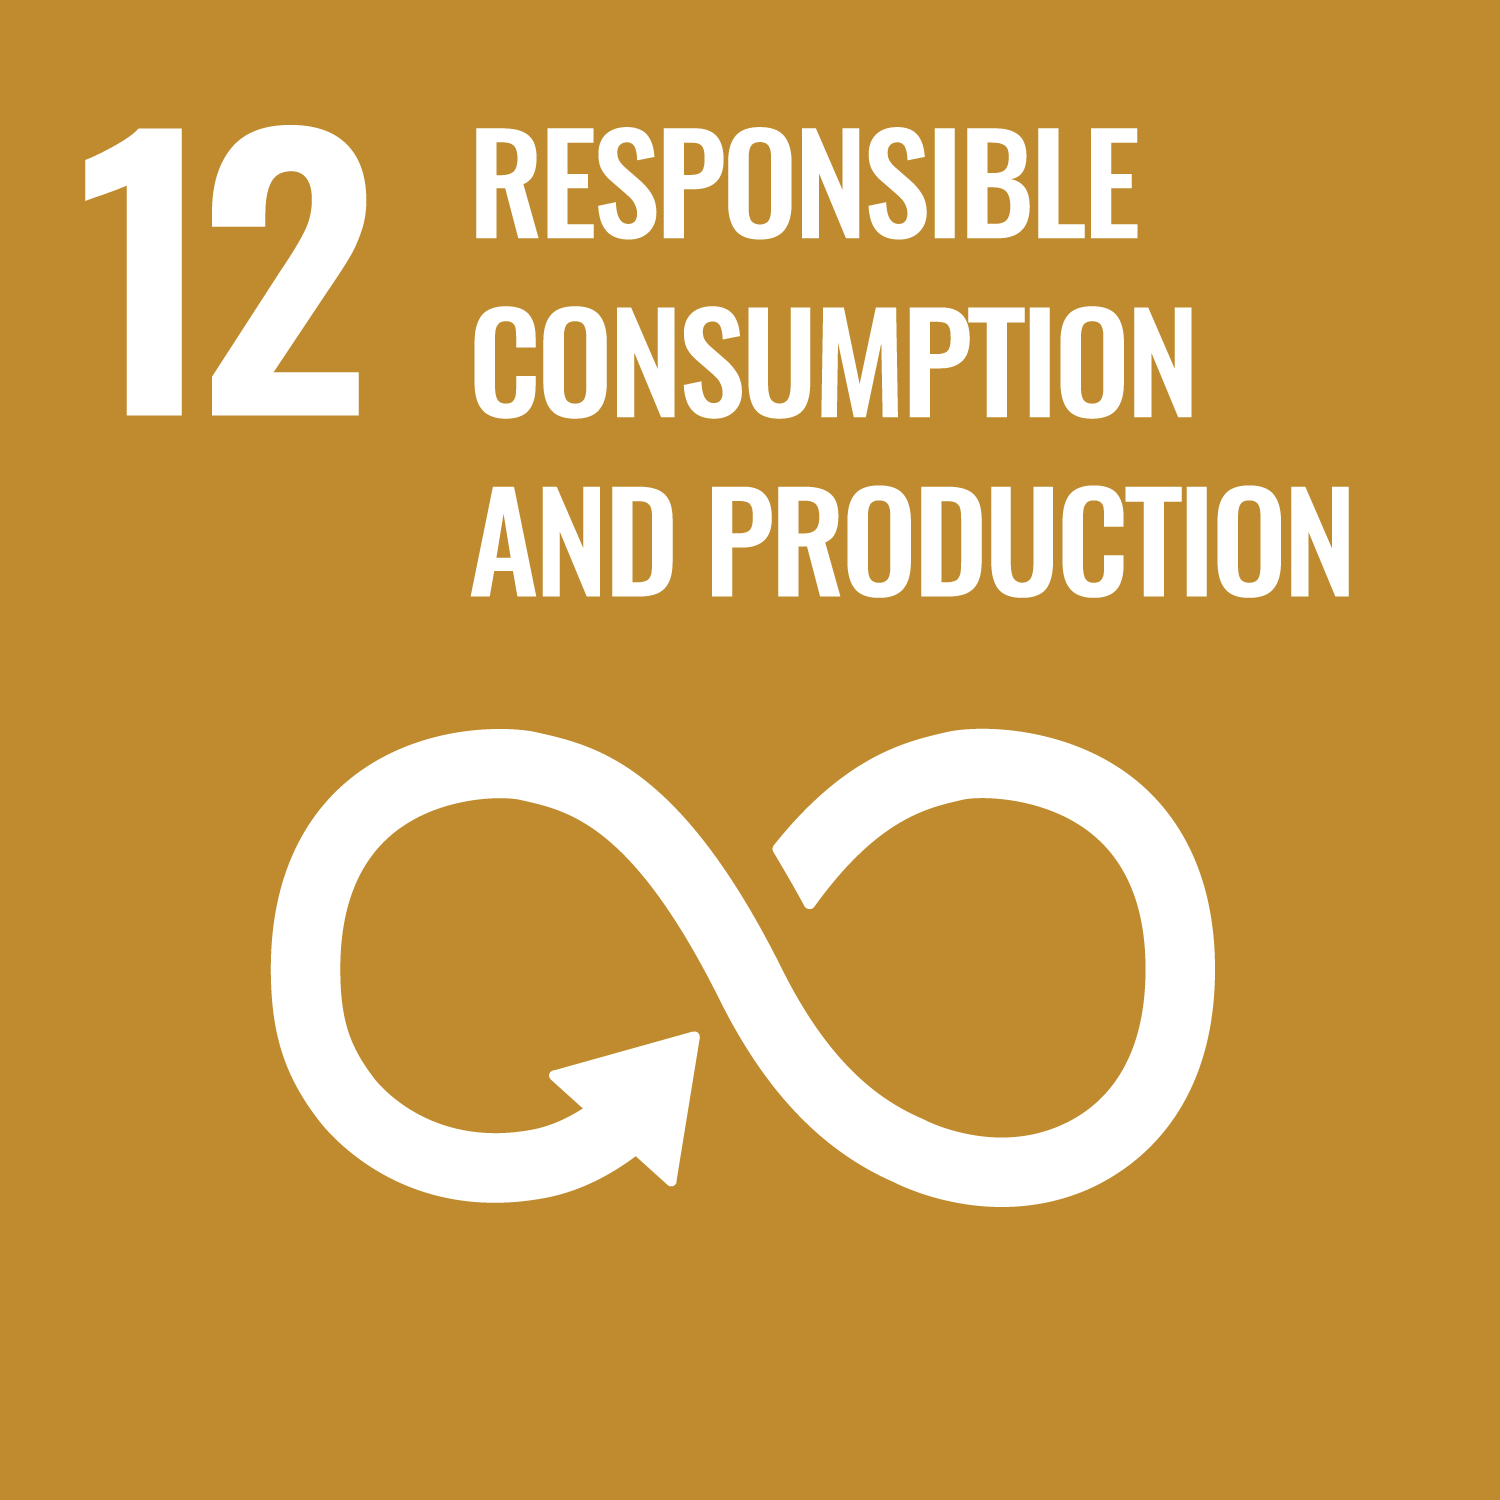 SDG icon #12: responsible consumption and production